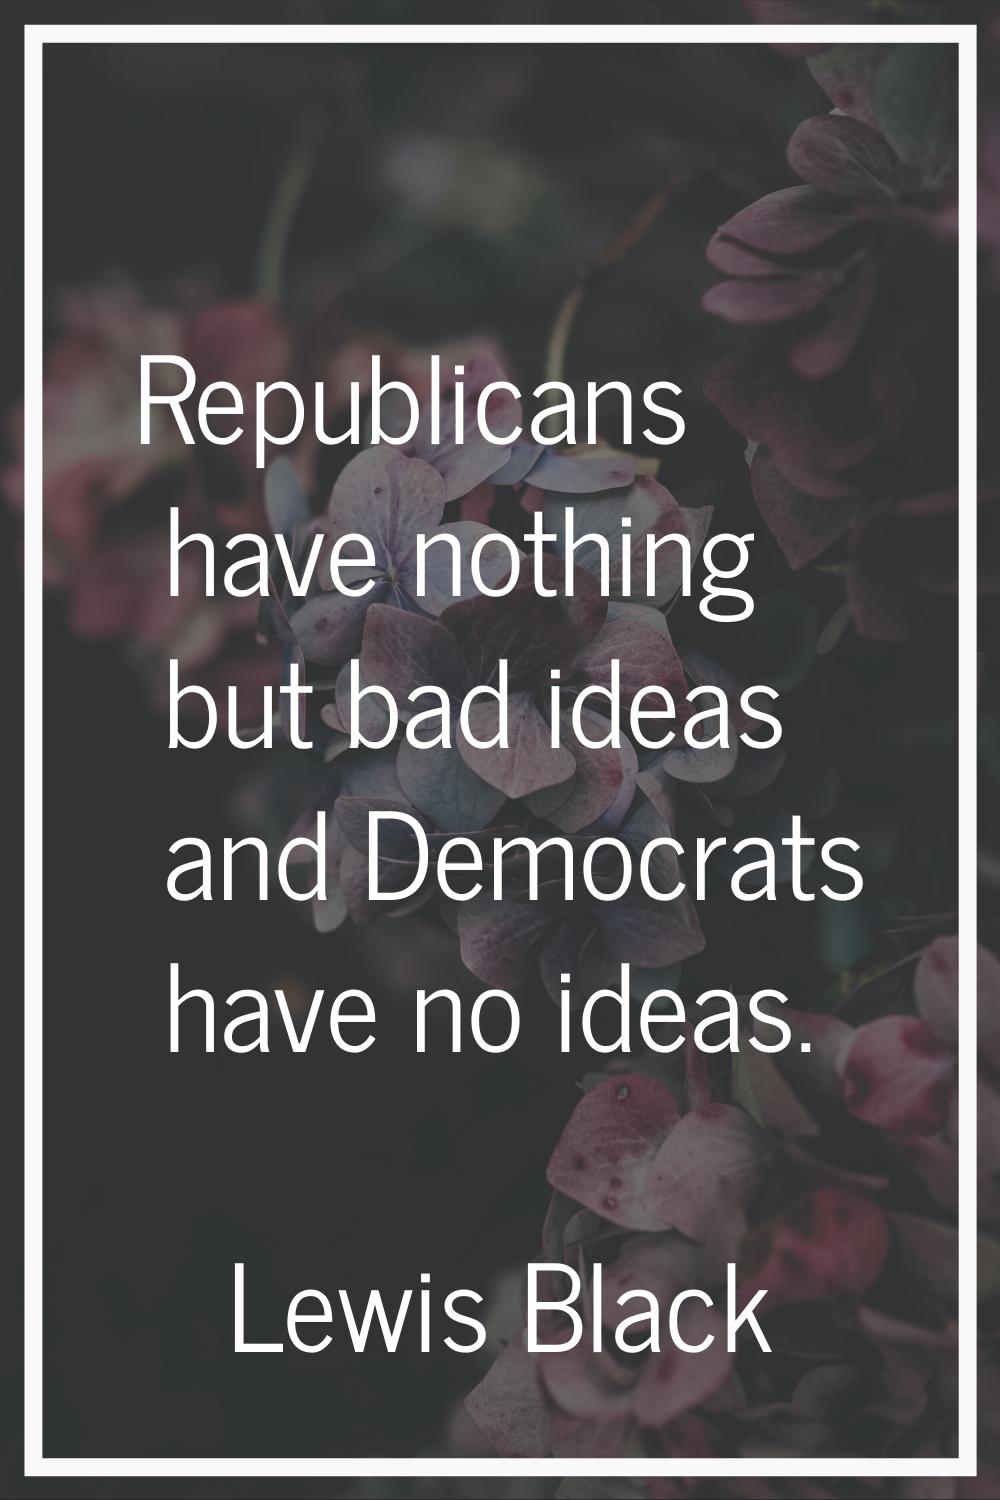 Republicans have nothing but bad ideas and Democrats have no ideas.